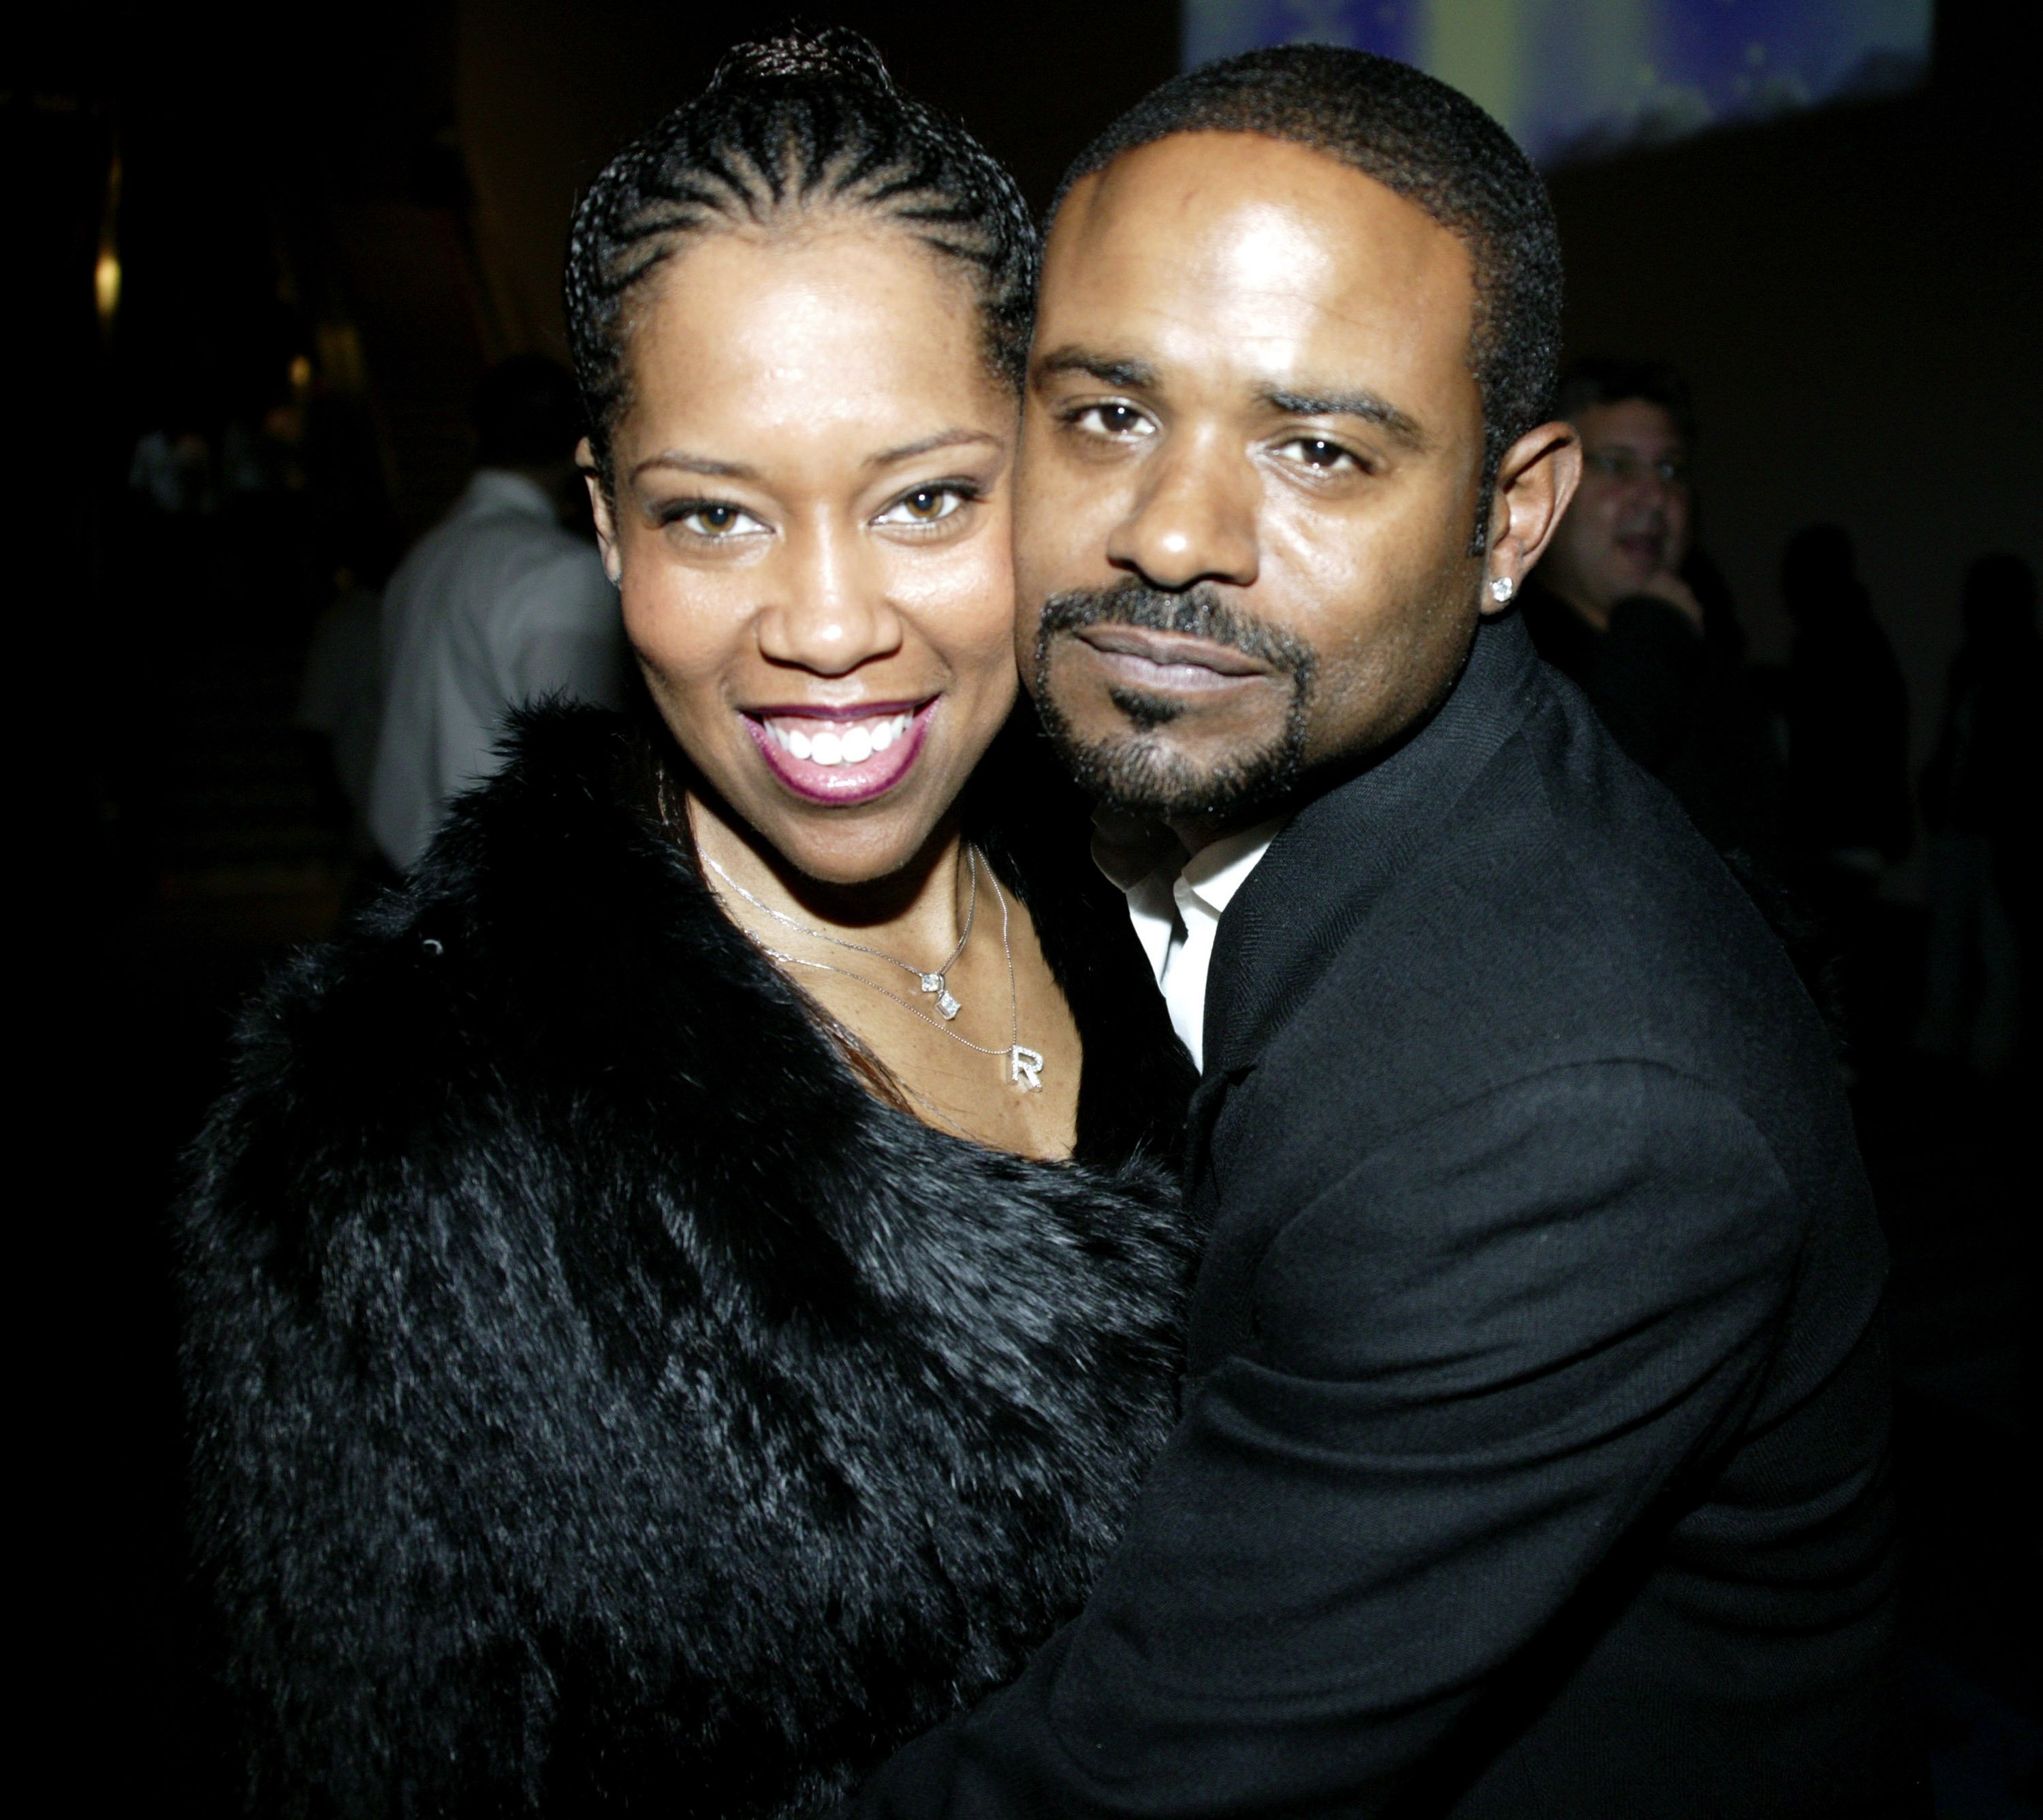 Regina King and Ian Alexander Sr. at the NBPA All-Star Ice Gala on February 19, 2005 | Source: Getty Images